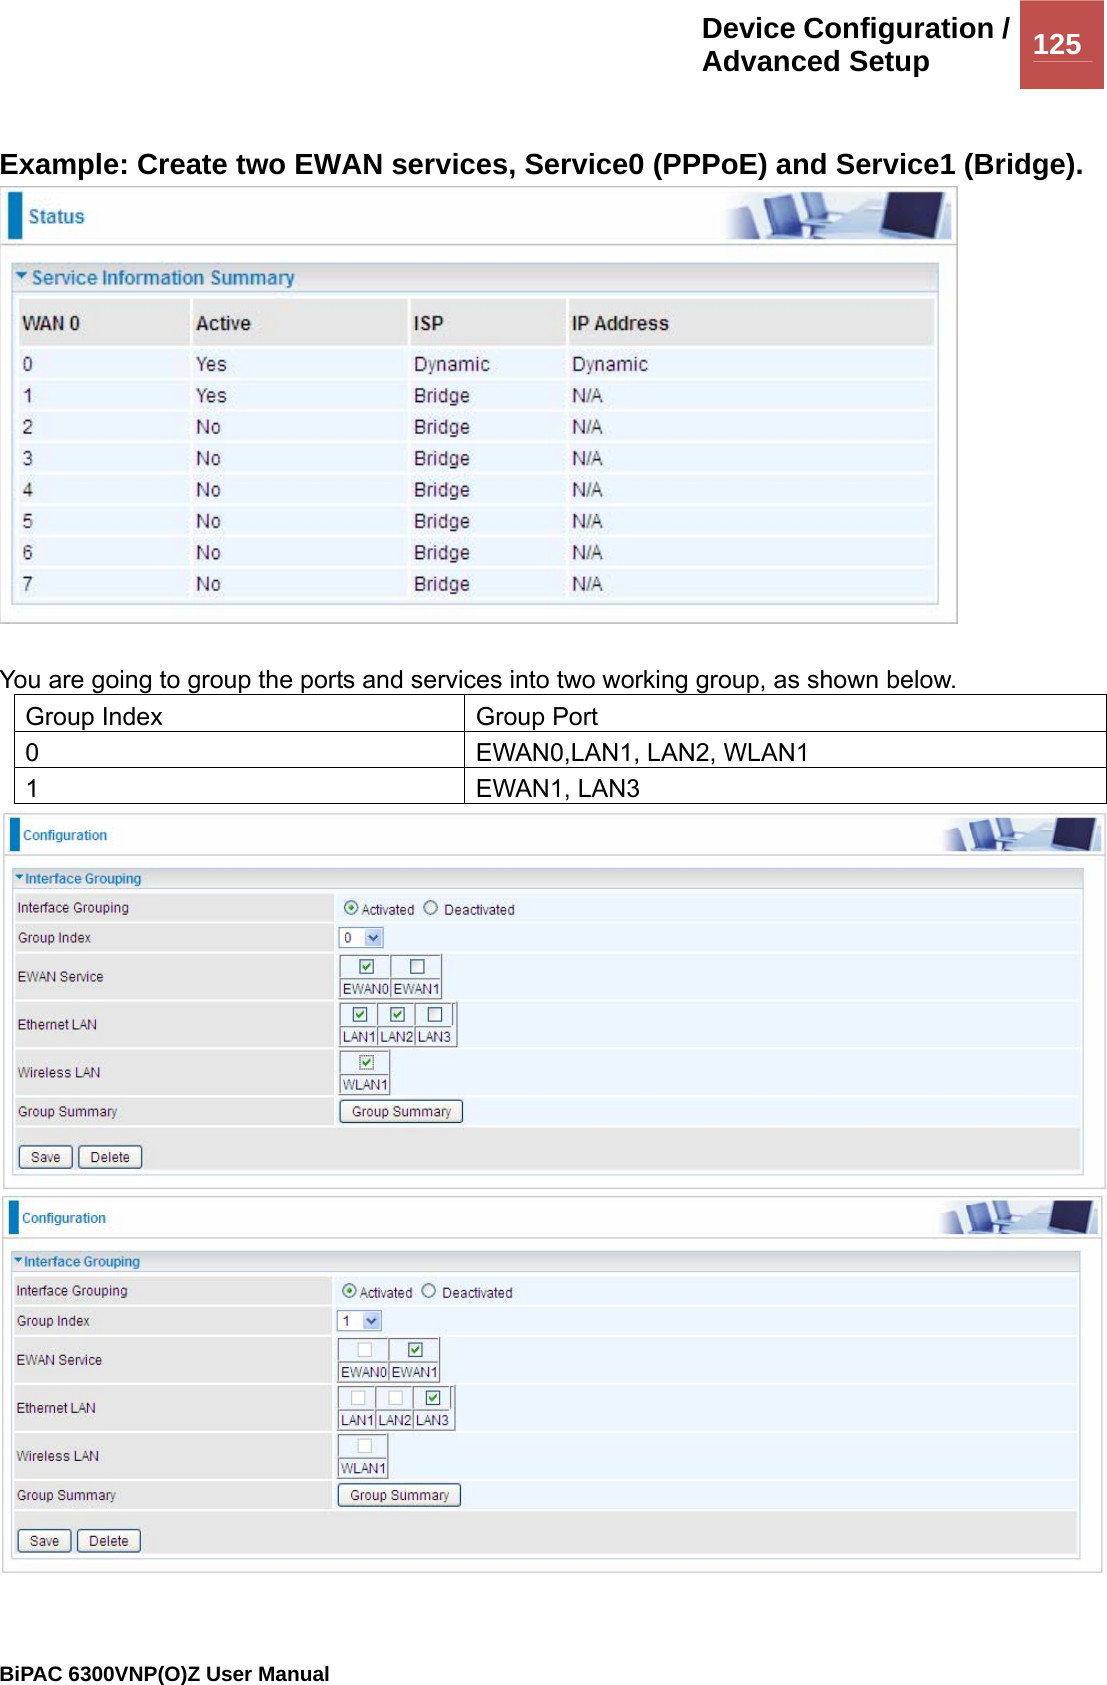 Device Configuration /Advanced Setup  125                                                BiPAC 6300VNP(O)Z User Manual   Example: Create two EWAN services, Service0 (PPPoE) and Service1 (Bridge).    You are going to group the ports and services into two working group, as shown below.  Group Index  Group Port 0  EWAN0,LAN1, LAN2, WLAN1 1 EWAN1, LAN3   